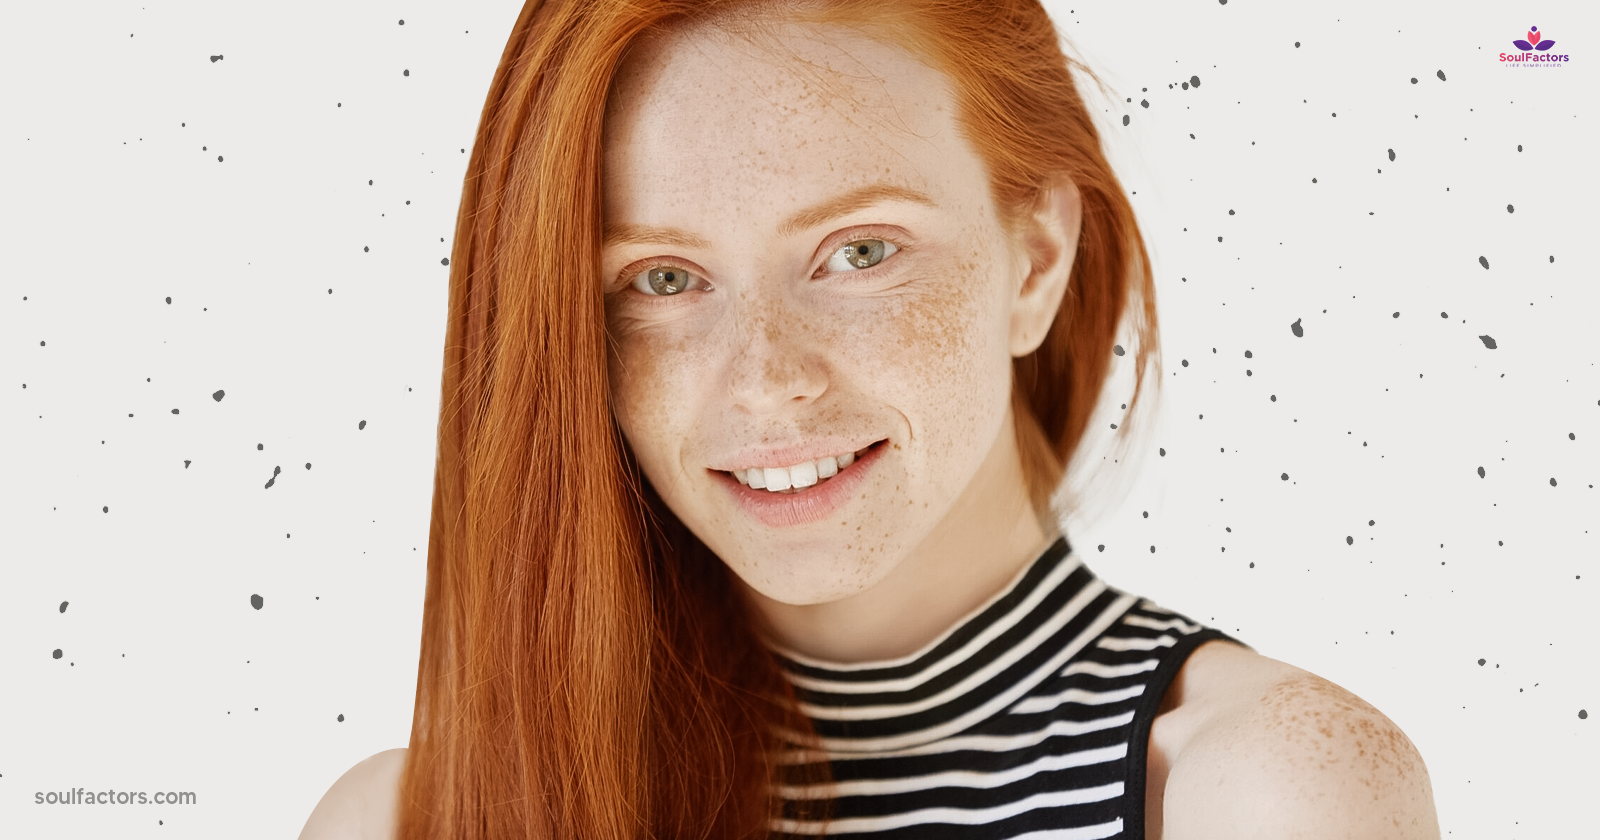 How to get natural-looking fake freckles